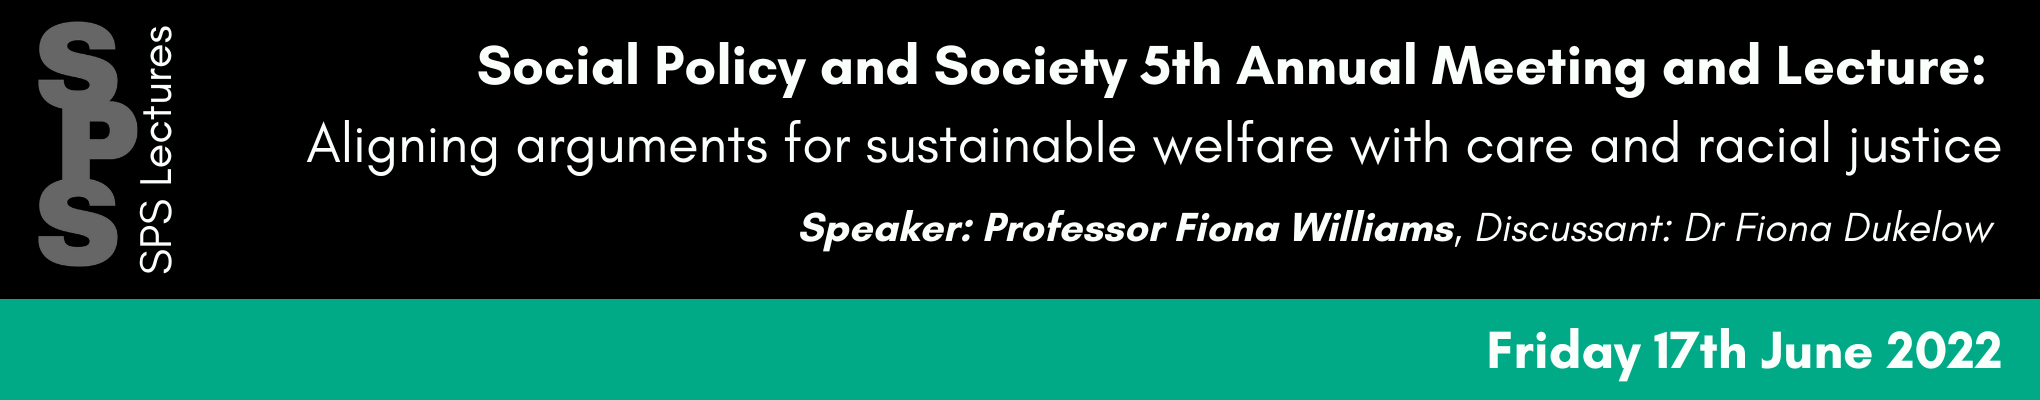 Social Policy and Society 5th Annual Meeting and Lecture